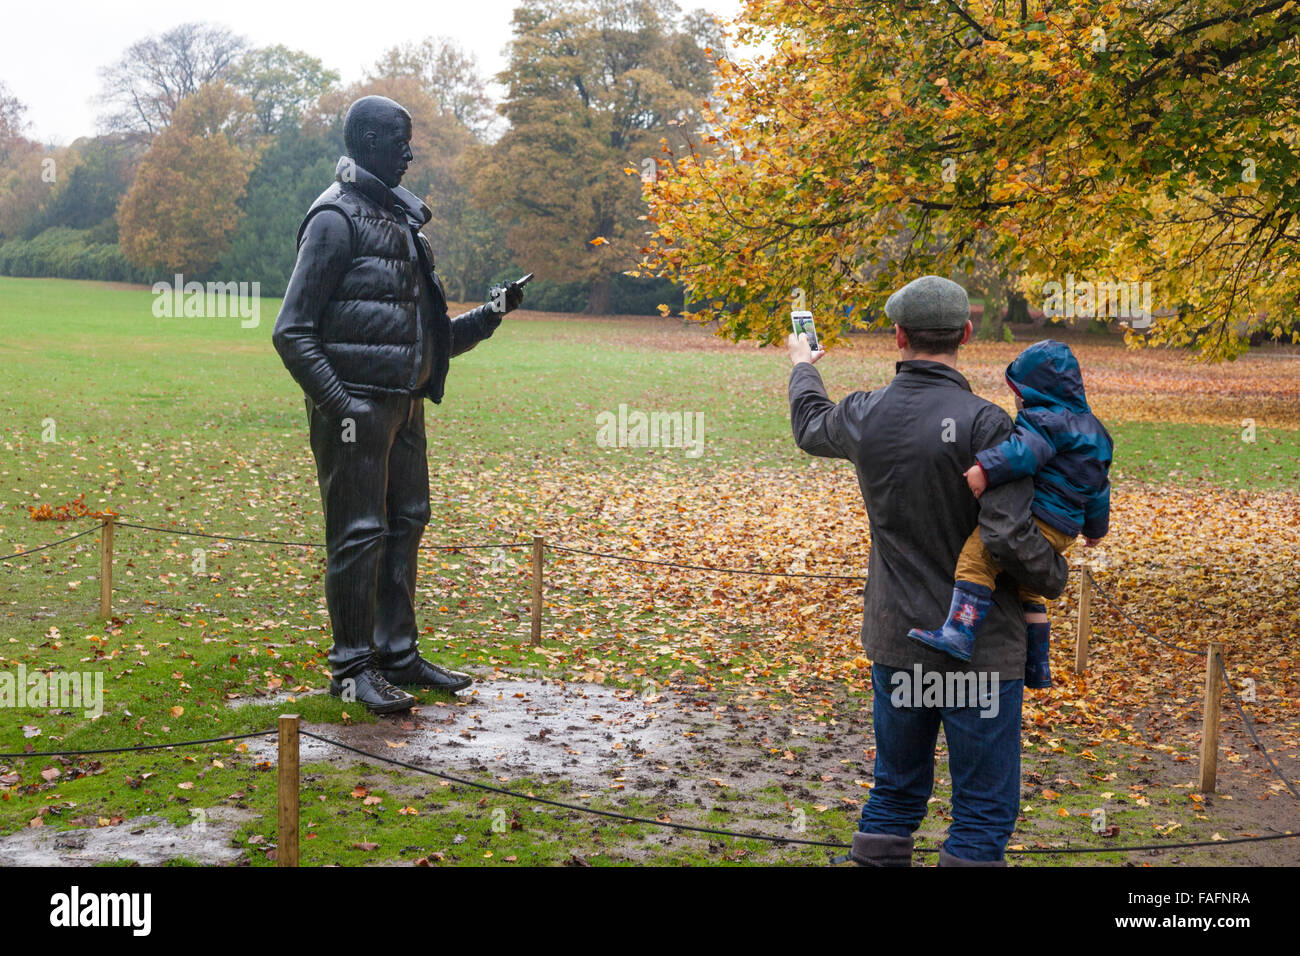 Thomas Price's 'Network' being photographed by mobile phone on a wet day at the Yorkshire Sculpture Park, Wakefield, West Yorkshire UK Stock Photo